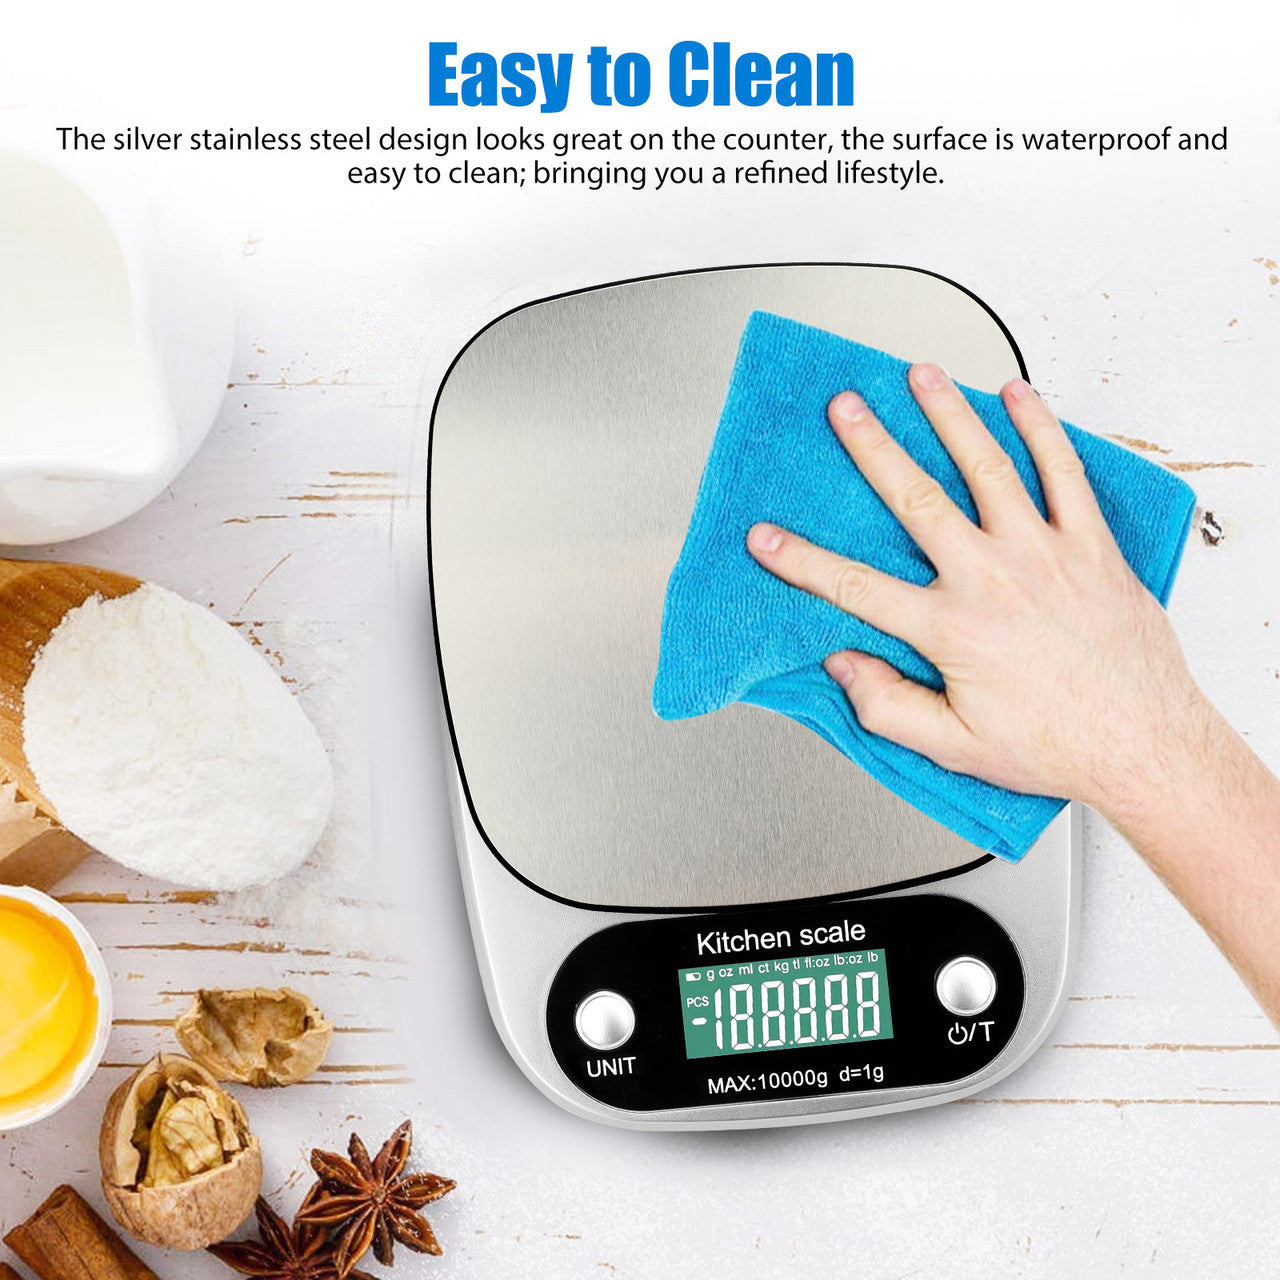 Food Kitchen Scale - Stainless Steel Digital Grams and Ounces LCD Display for Weight Loss, Baking, Cooking (Silver)